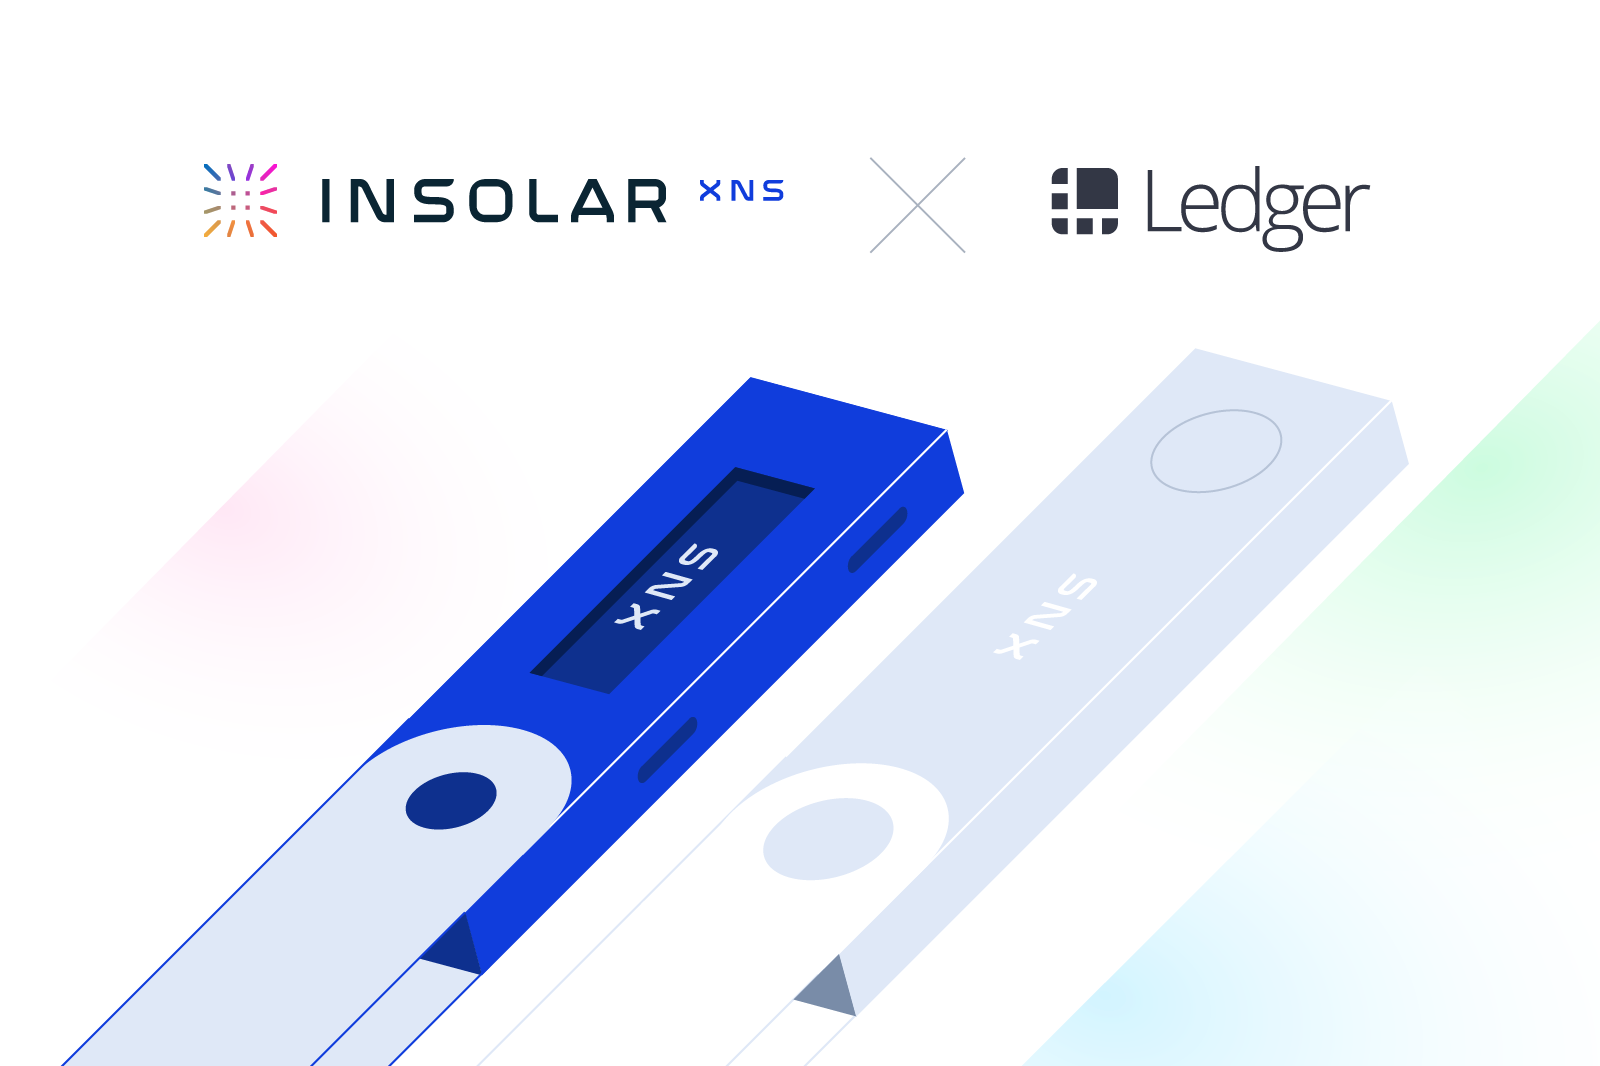 Insolar s Now Supported On Ledger Nano S And Nano X Hardware Wallets By Insolar Team Insolar Medium